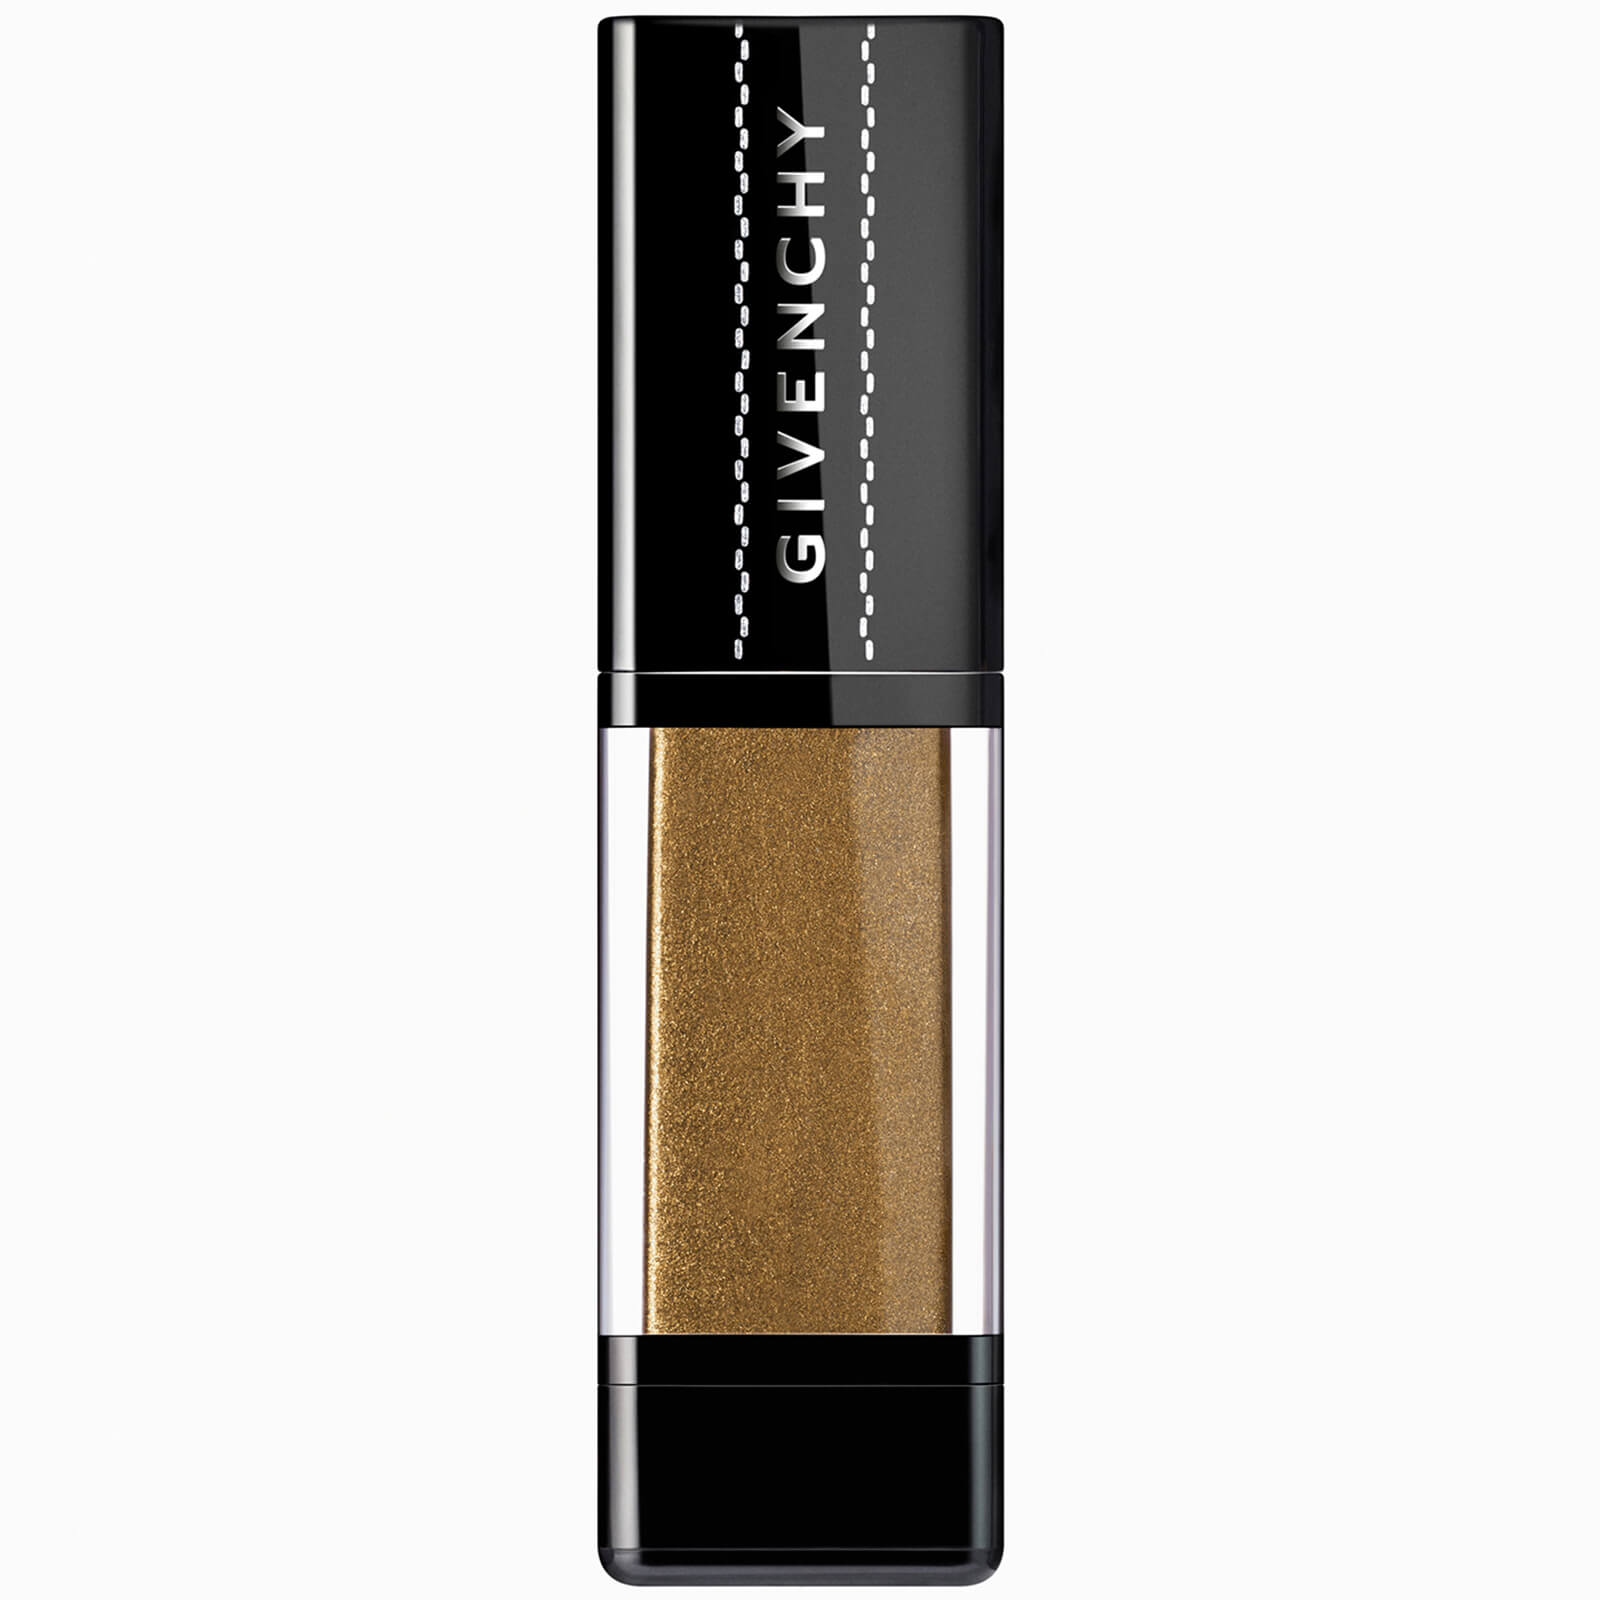 Givenchy Ombre Interdite Eyeshadow 10g (Various Shades) - N05 Outline Bronze